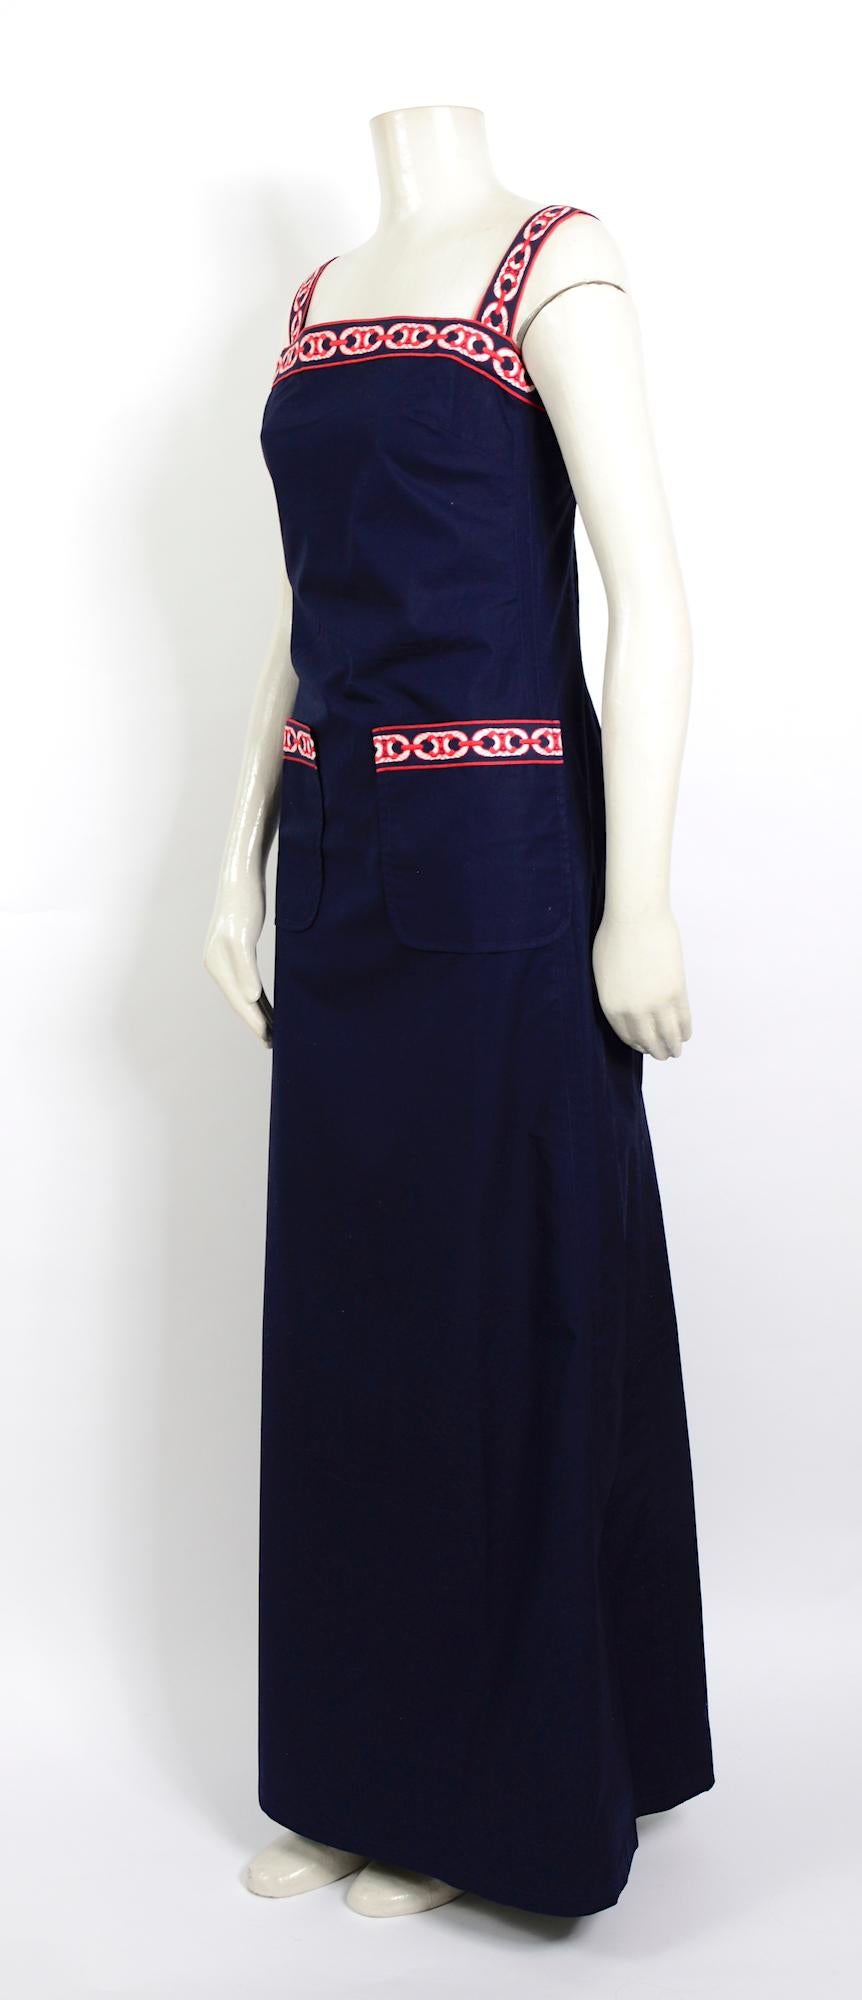 Unique rare find.
Collector's item!!!
1960s vintage Celine A-line silhouette long bleu cotton sleeveless dress, red and white logo trim at straps and front pockets for signature style.
Please go by the measurements for the perfect fit.
Ua to Ua